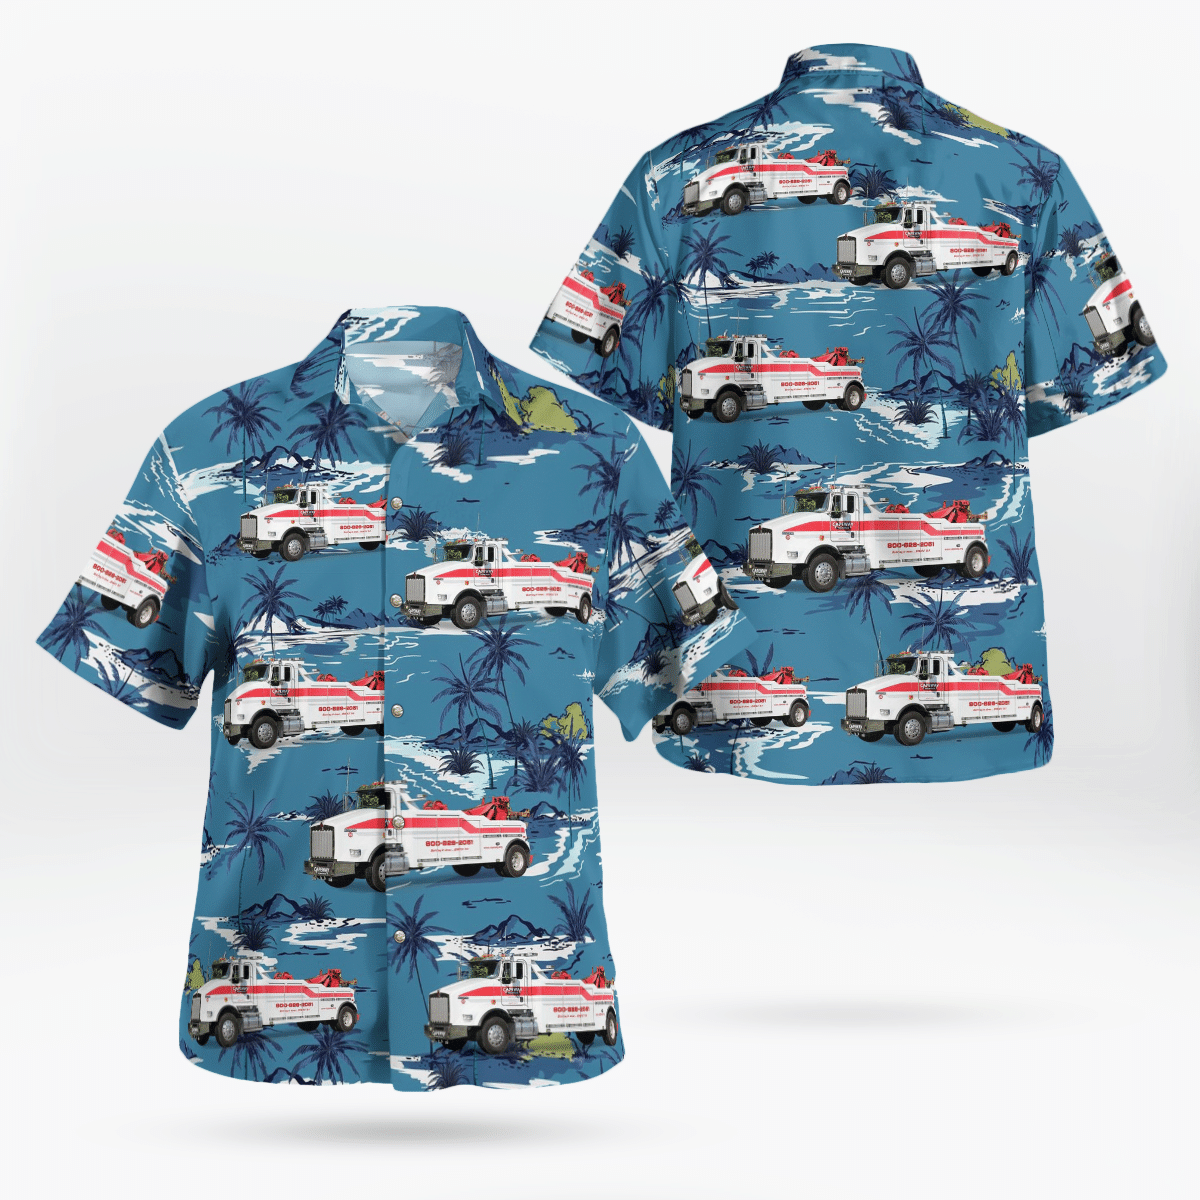 If you are in need of a new summertime look, pick up this Hawaiian shirt 126